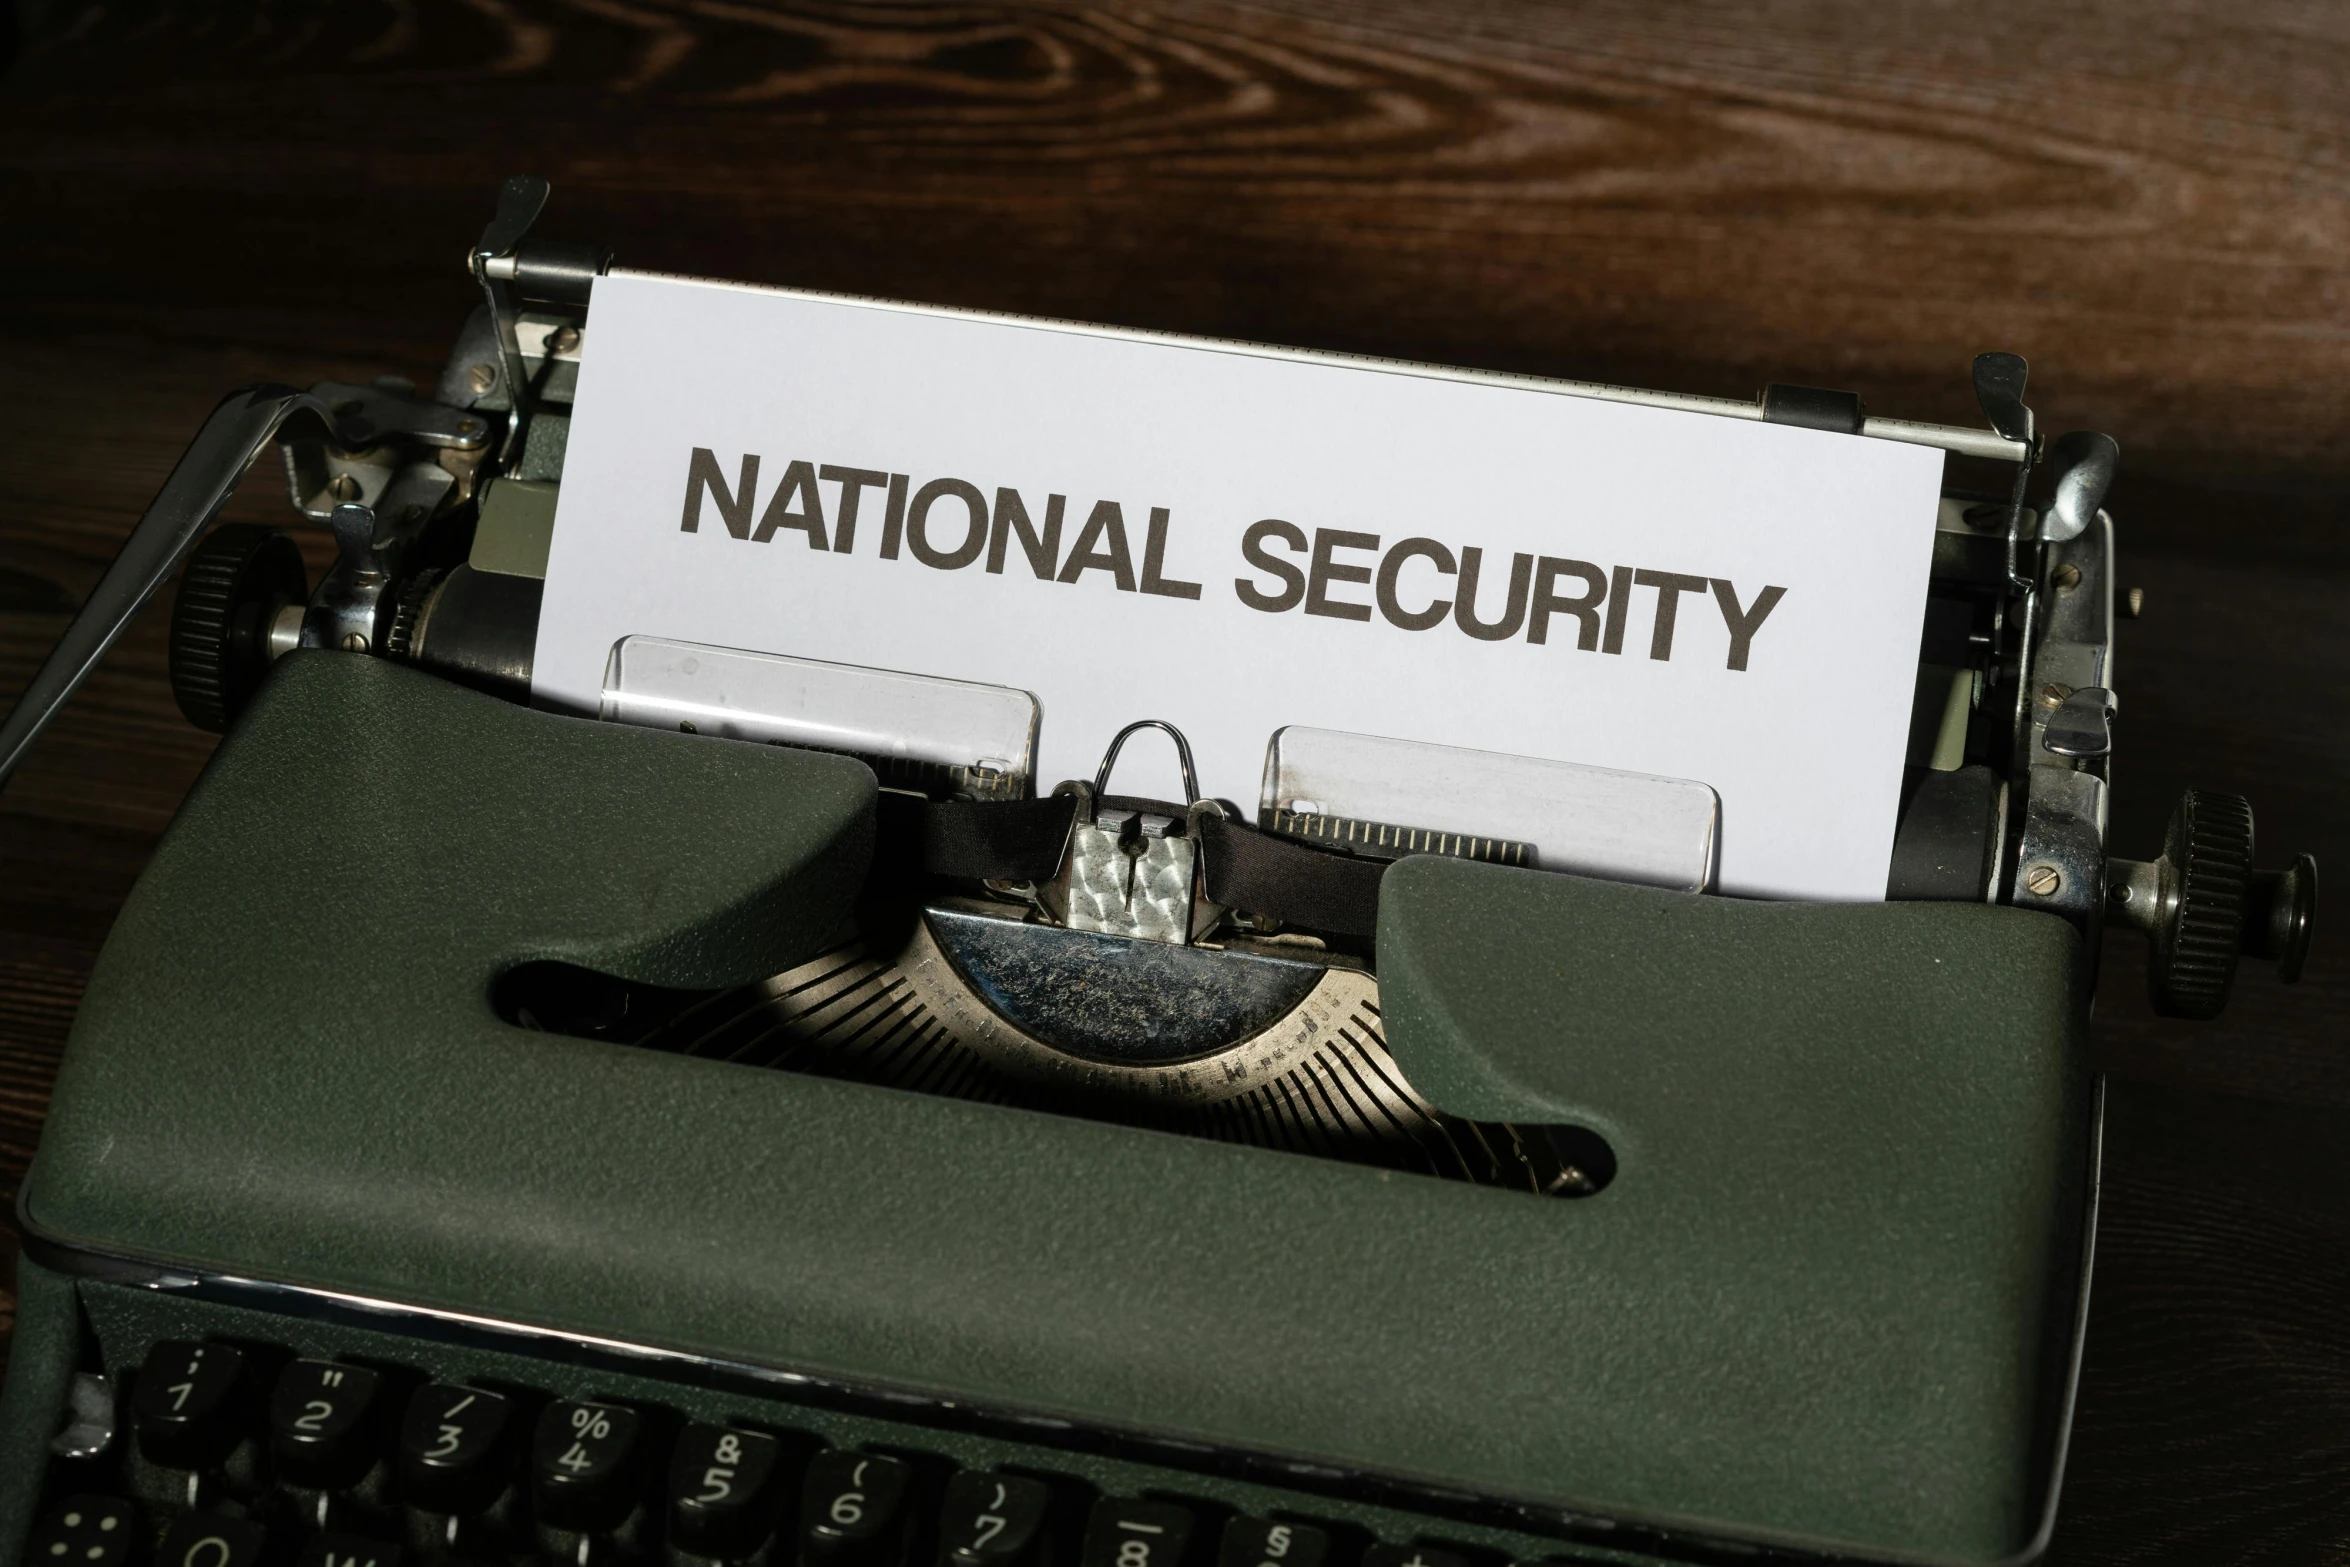 the national security paper stuck to an old typewriter